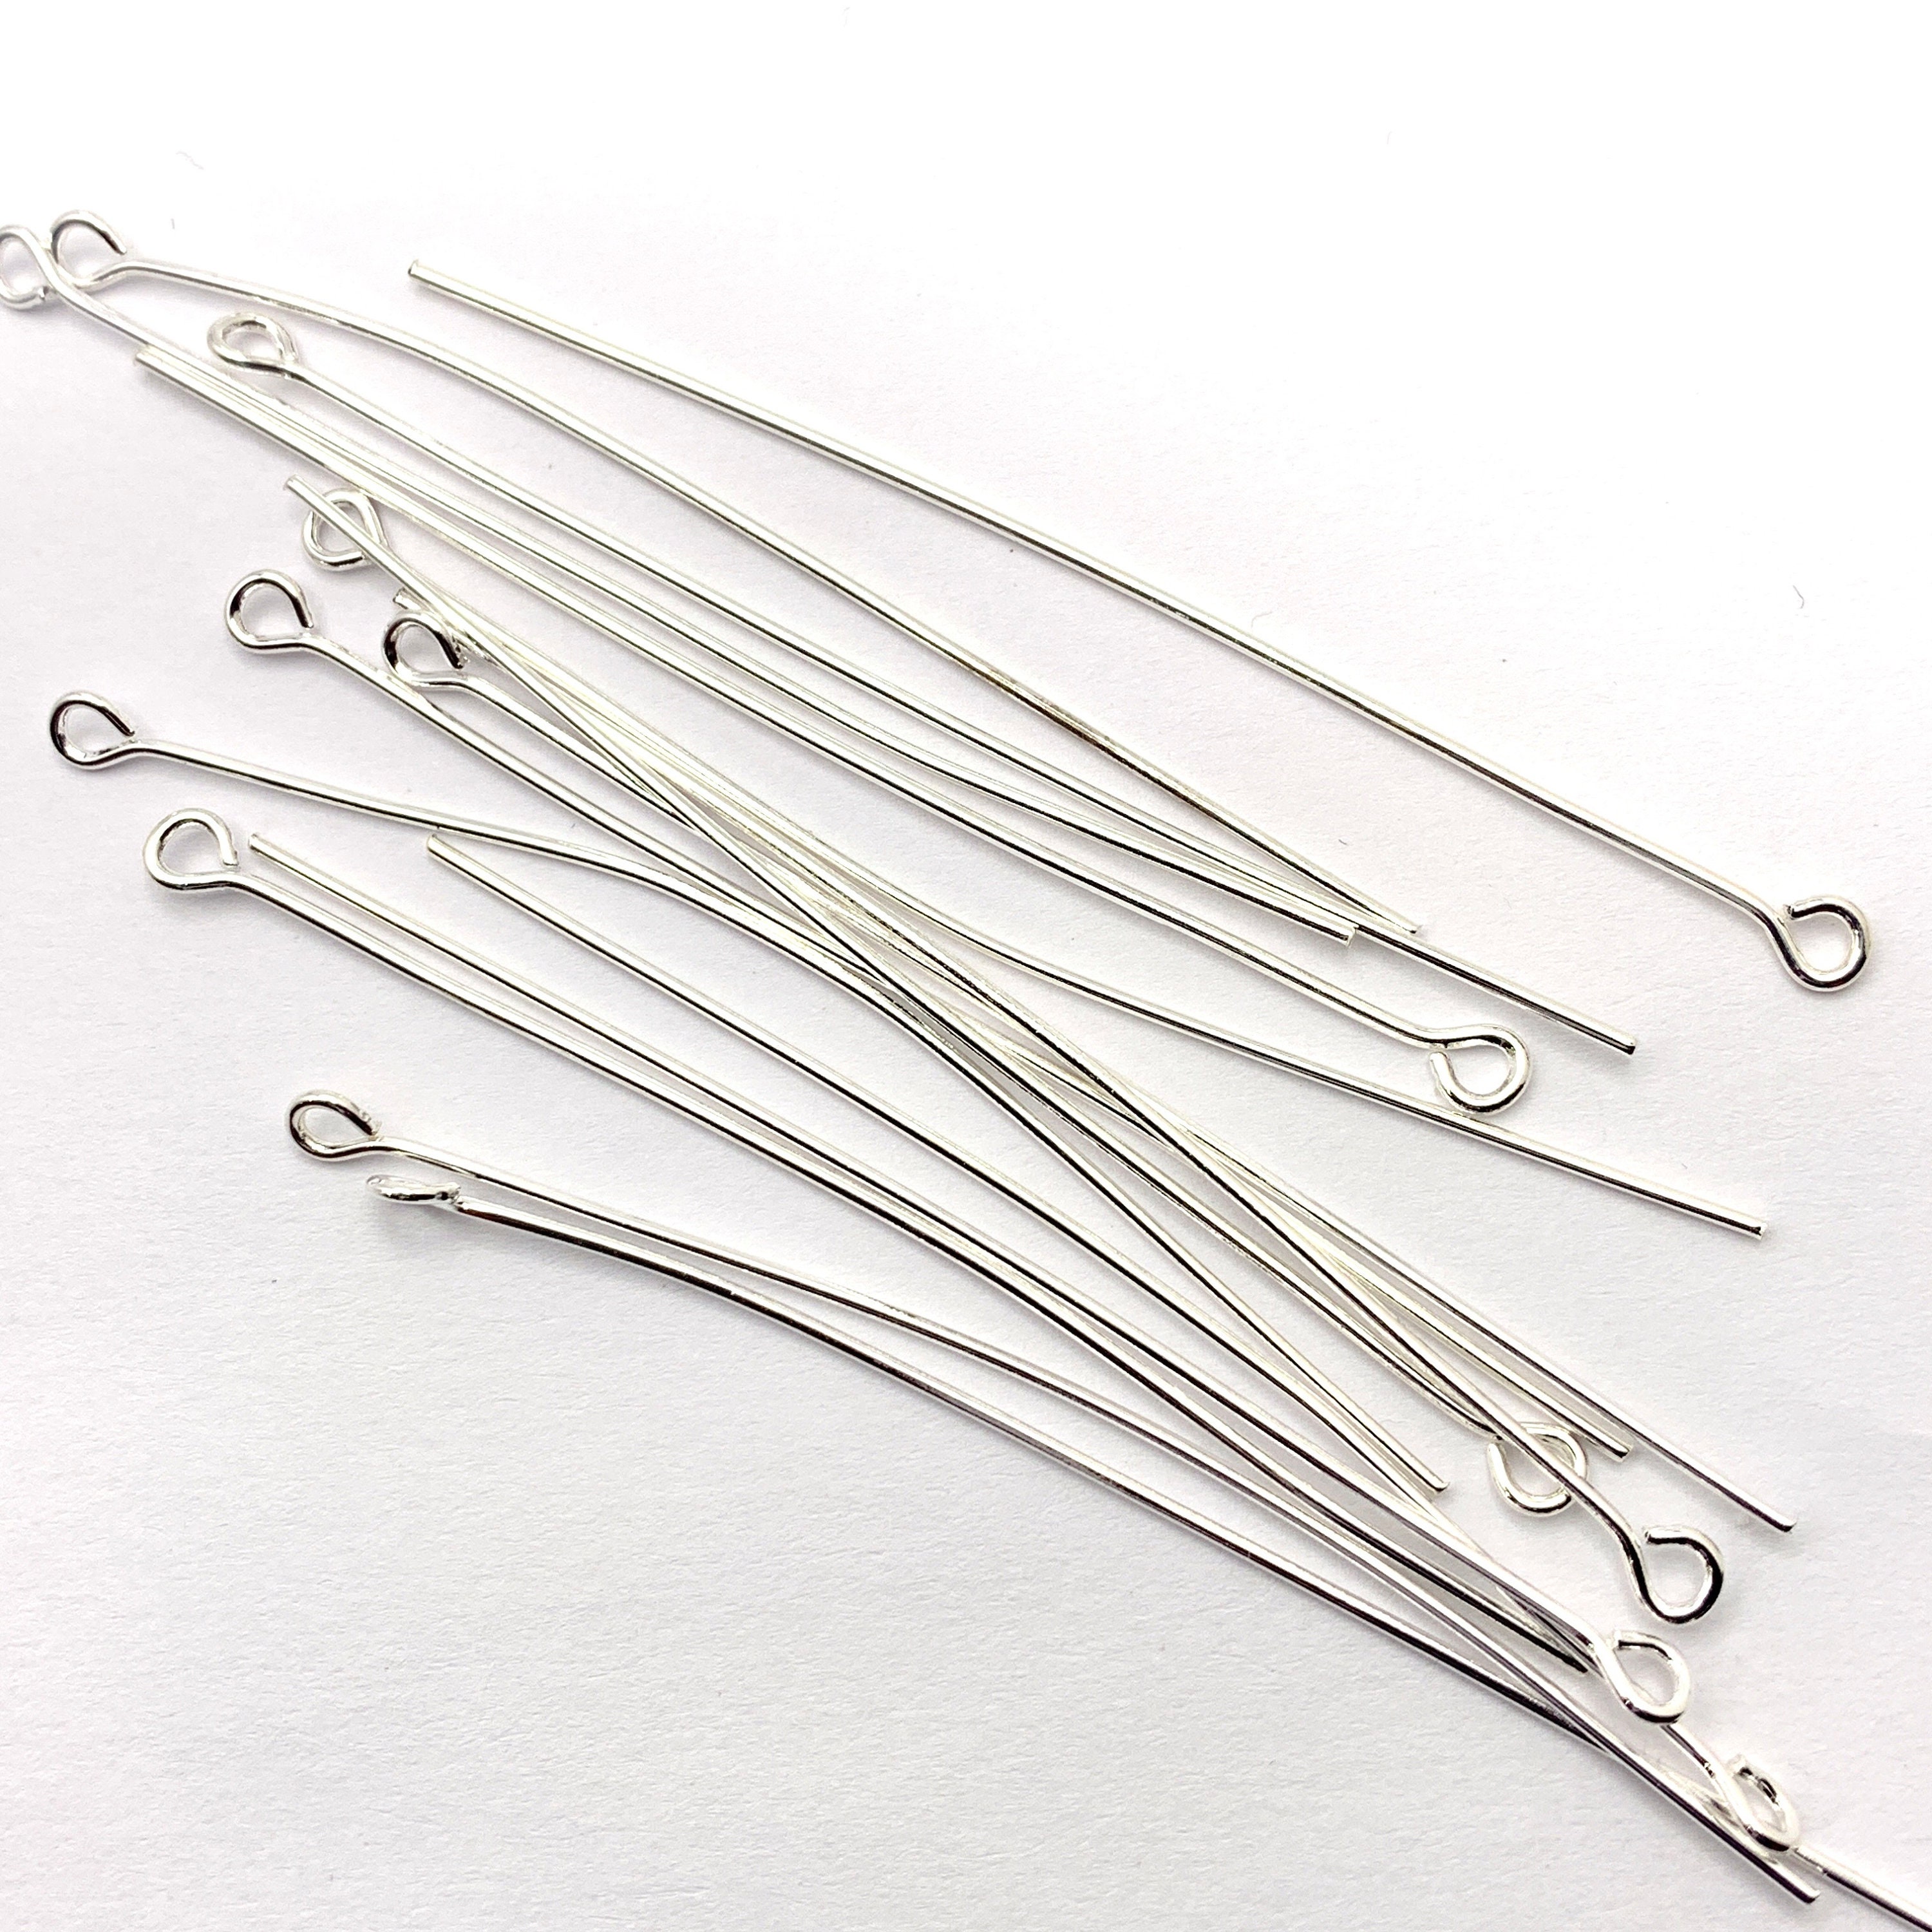 6cm Larger Silver or Gold Safety Pins SIZE 60mm/2.3 Inches, HIGH QUALITY  Kilt Pins, Brooch Pin, Silver or Gold Kilt Pin, 10 or 20 Pcs 